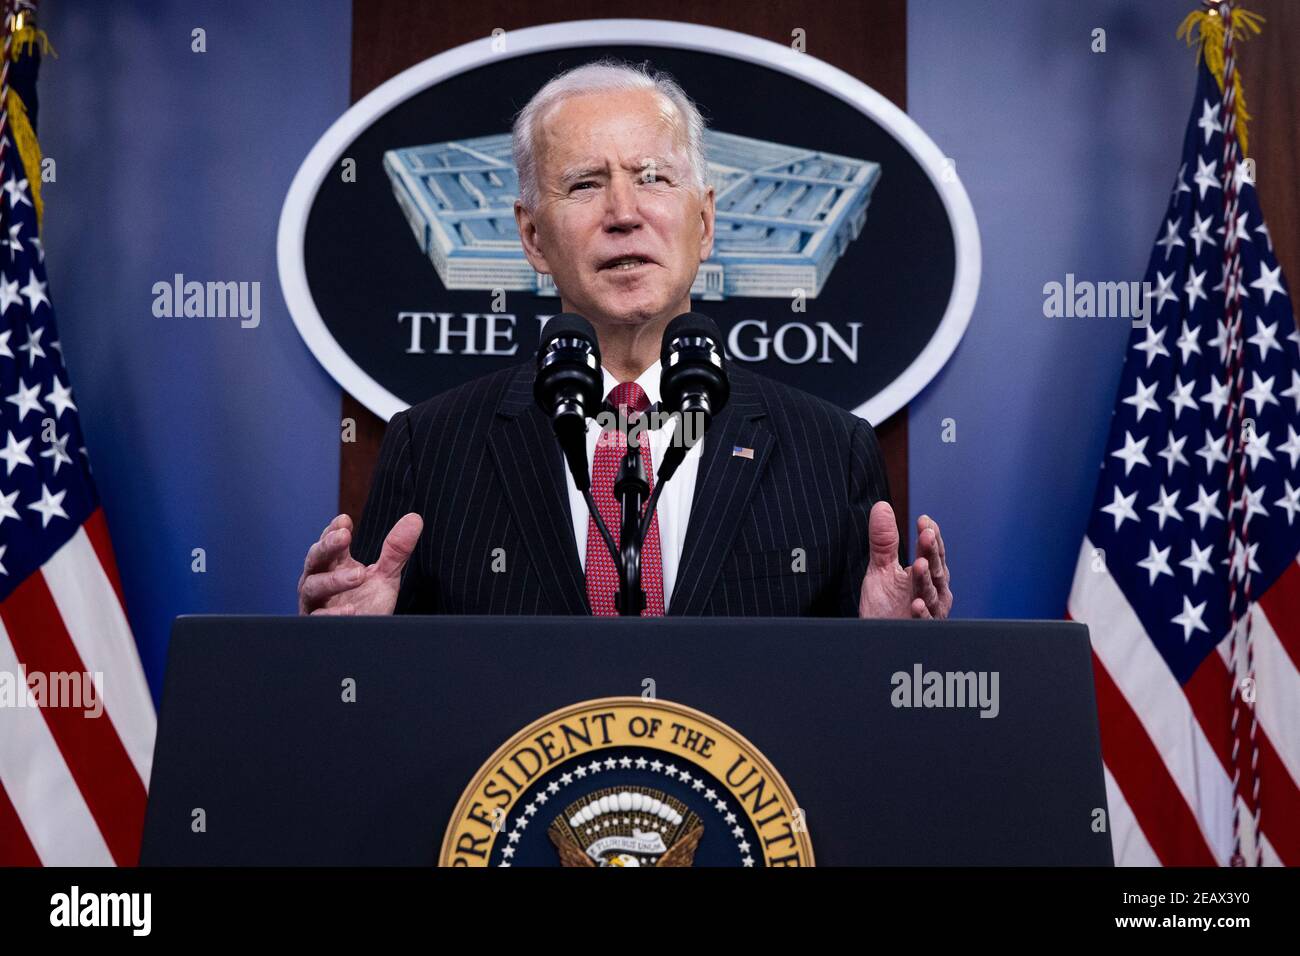 US President Joe Biden delivers remarks to Department of Defense, at the Pentagon in Arlington, Virginia, USA, 10 February 2021.Credit: Michael Reynolds/Pool via CNP /MediaPunch Stock Photo